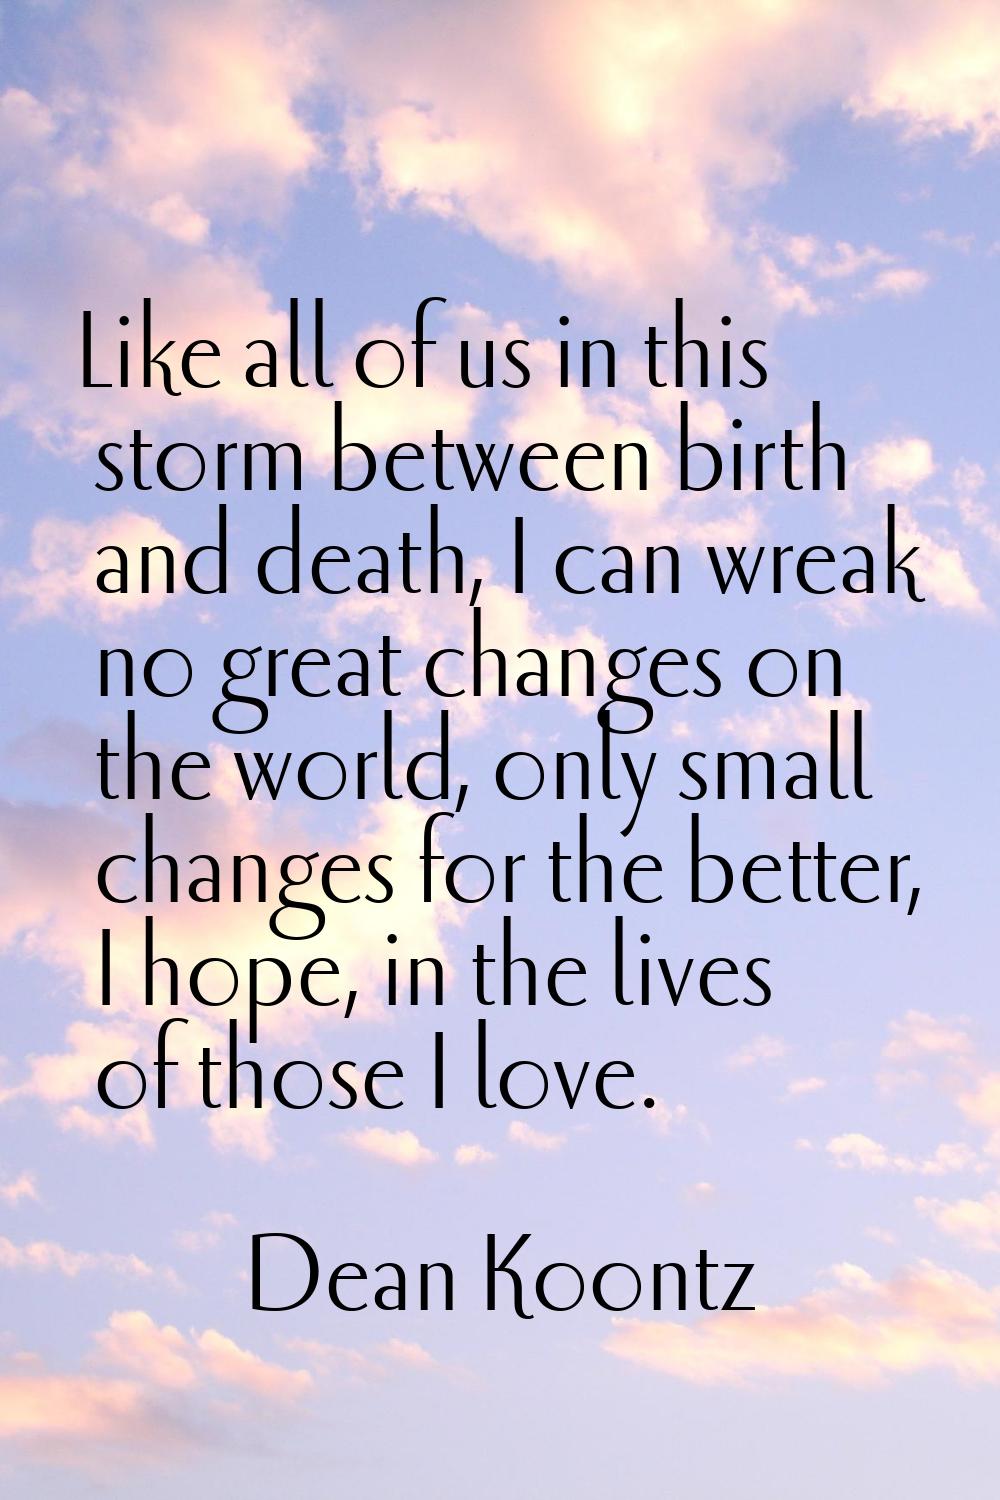 Like all of us in this storm between birth and death, I can wreak no great changes on the world, on